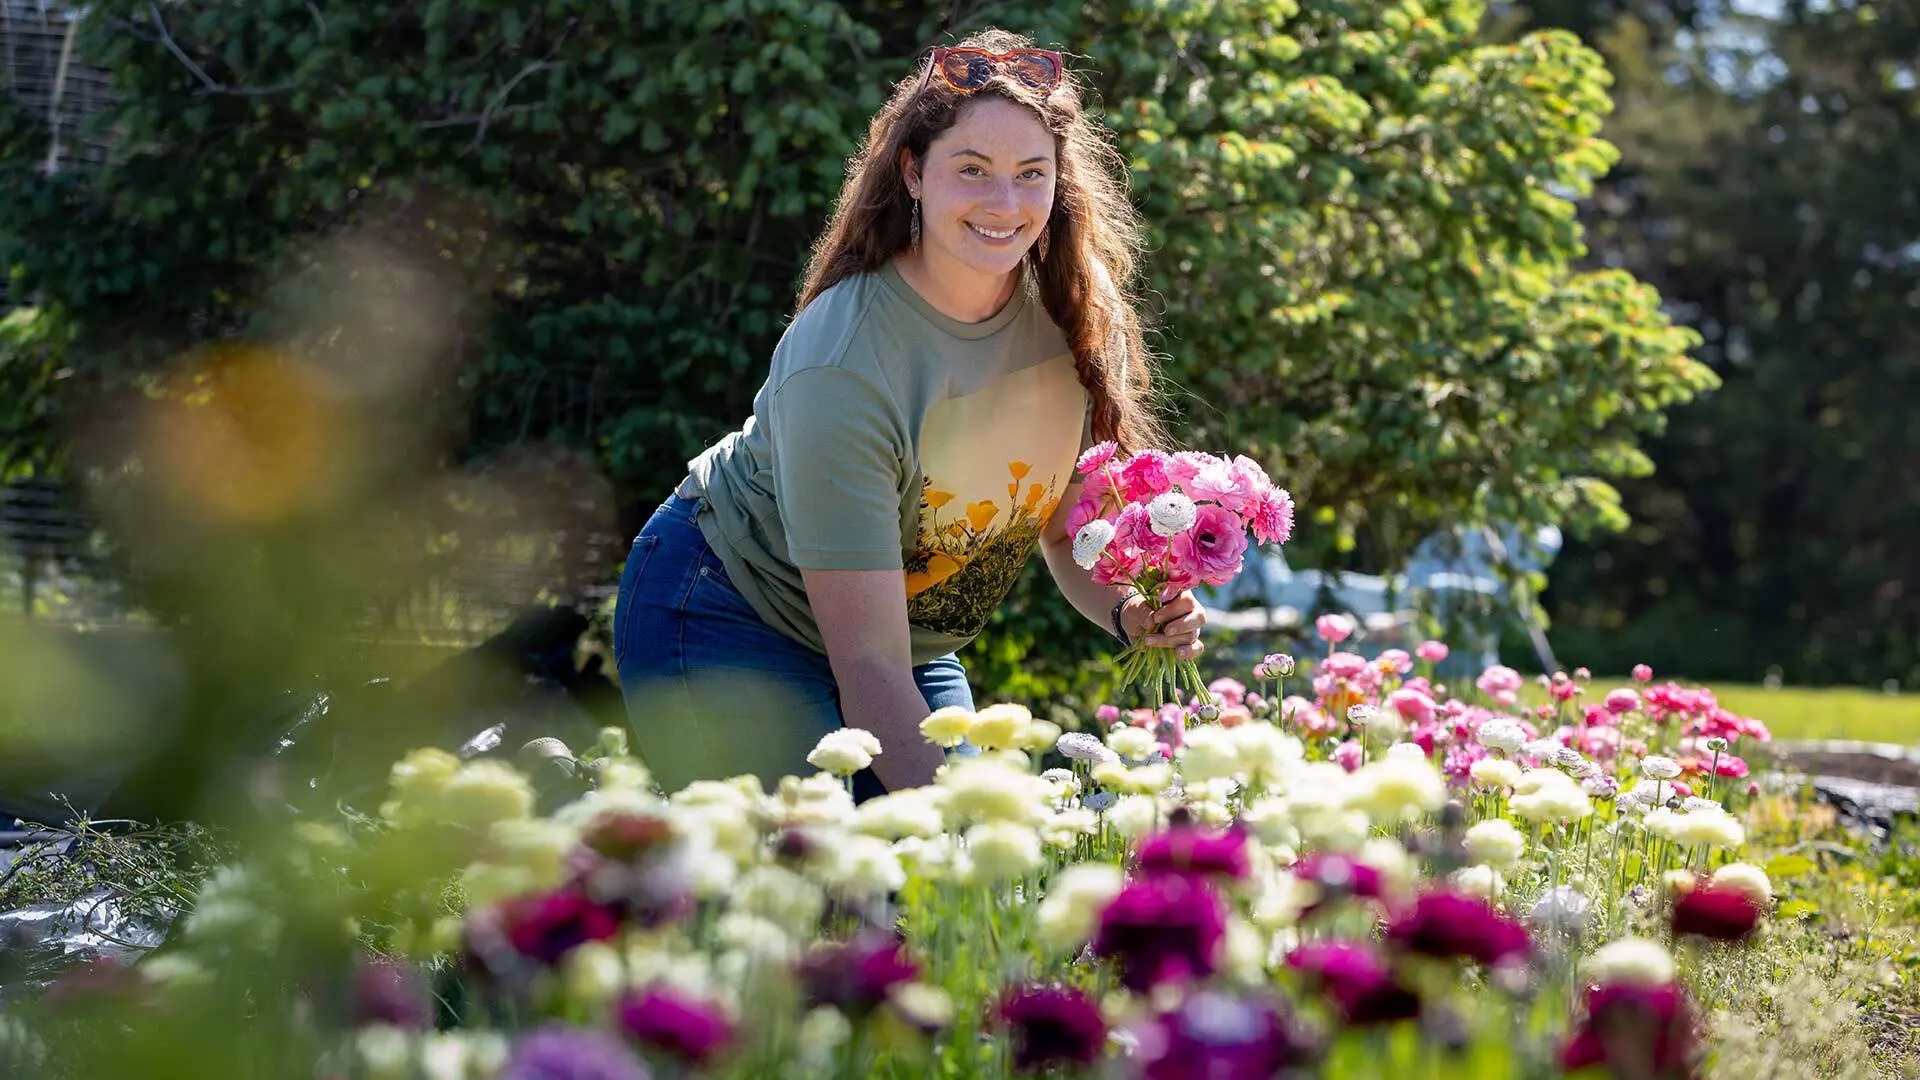 Rachel Ross '19 started SunKissed Flower Farm on Kent Island to honor the memory of her late grandmother. The self-described "farmer-florist" sells arrangements, wreaths, corsages and pressed flowers.